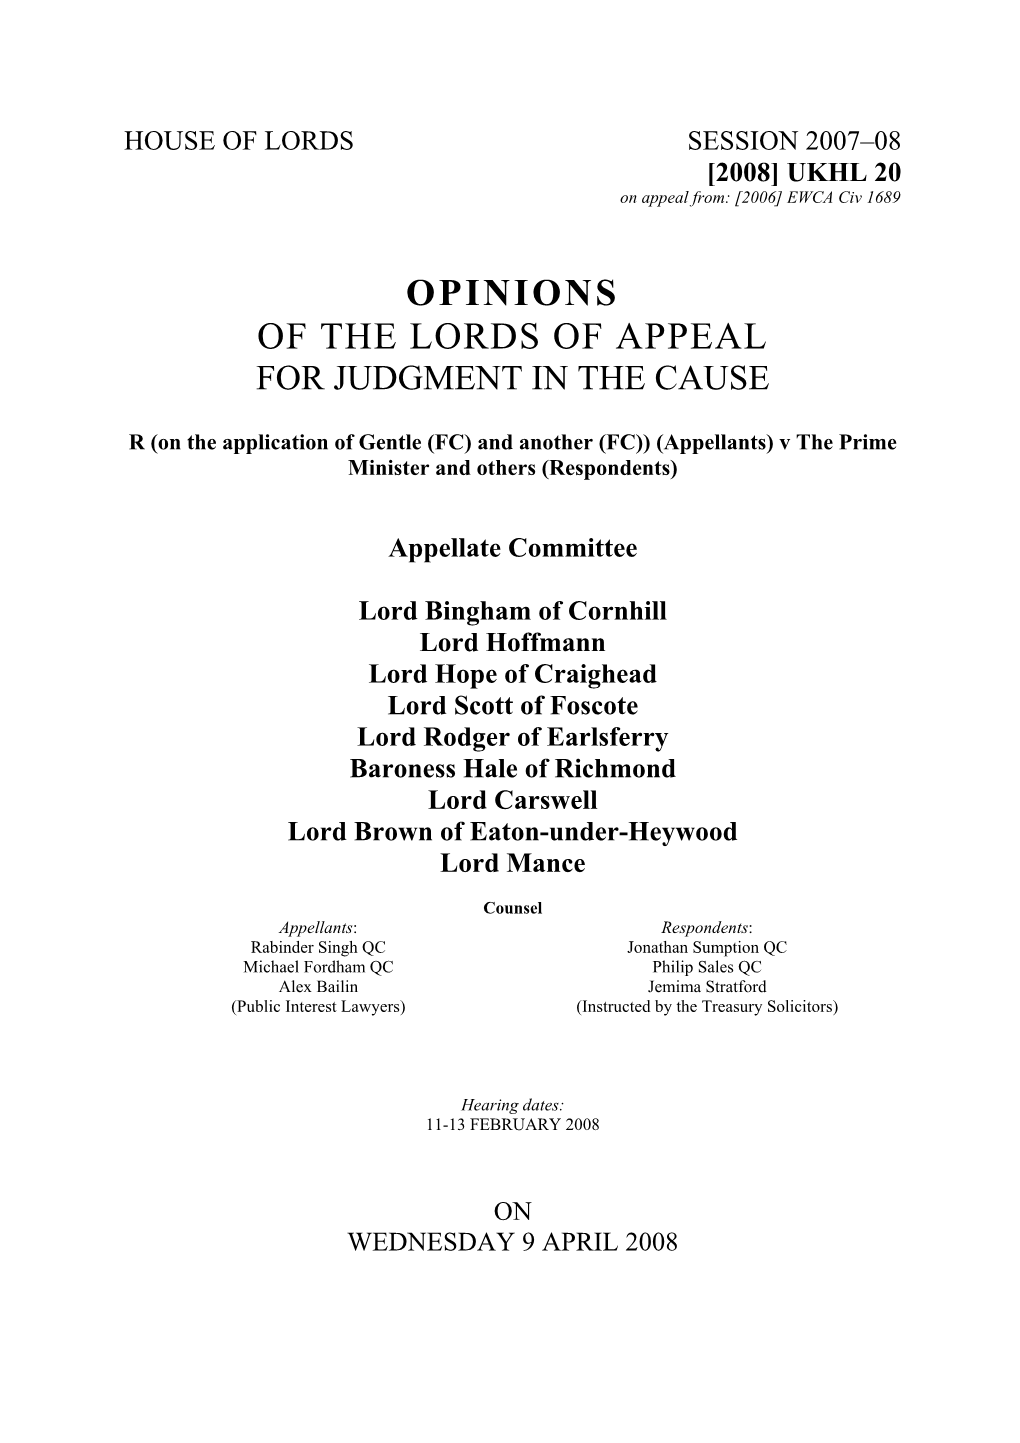 Opinions of the Lords of Appeal for Judgment in the Cause